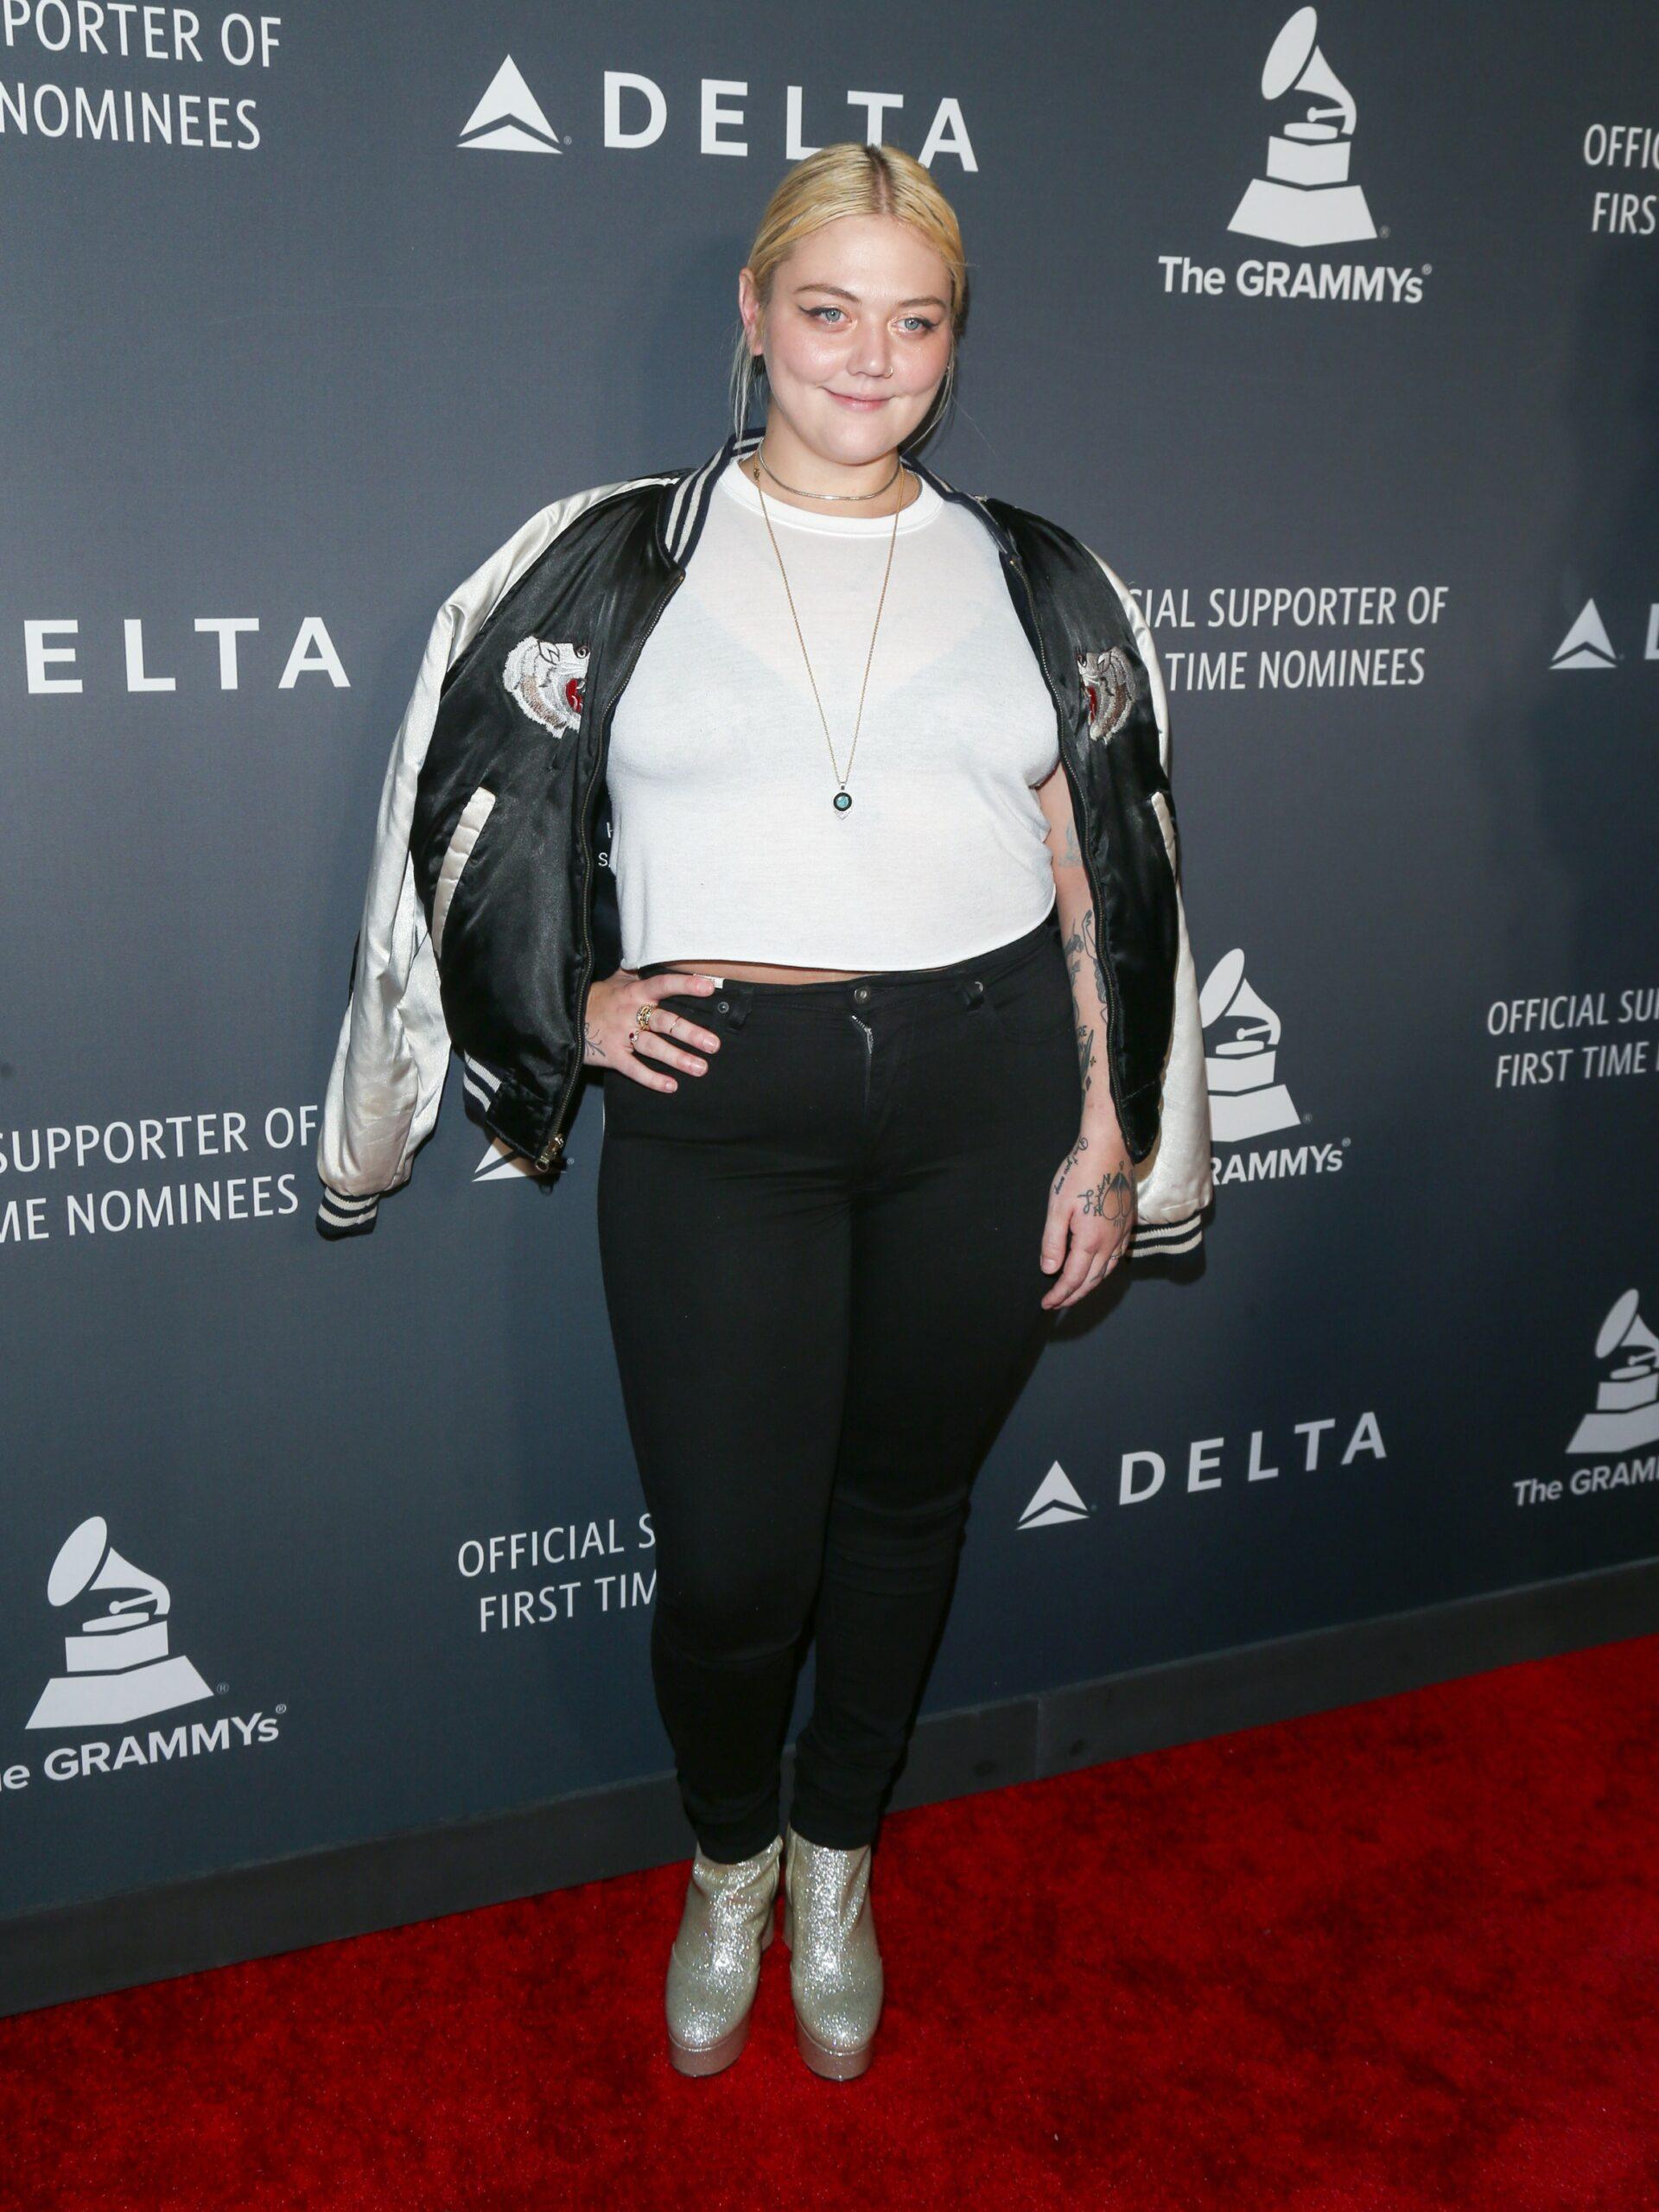 Celebrities arrive at the Delta Air Lines Grammy weekend event